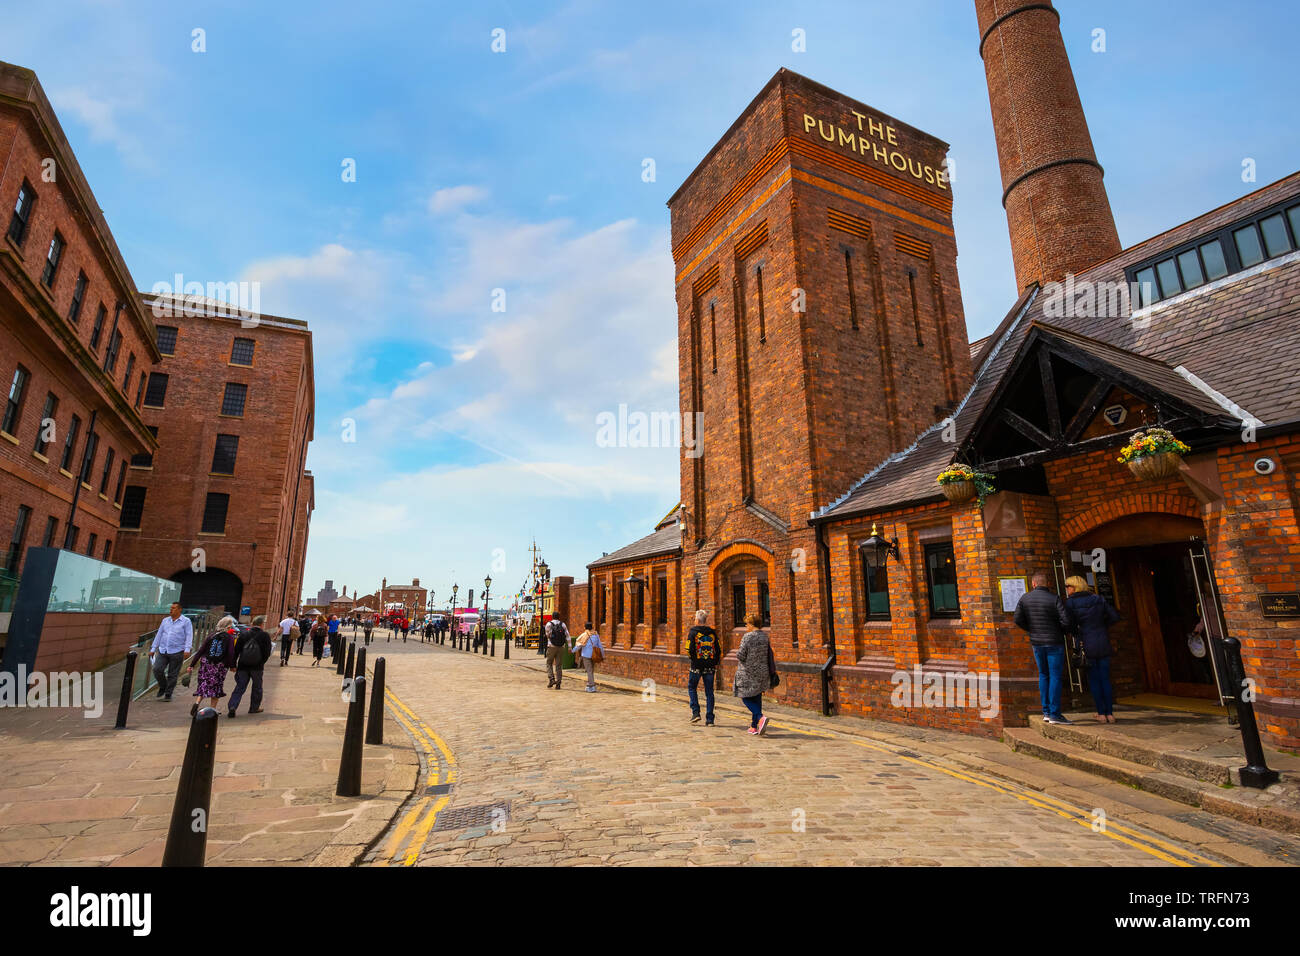 Liverpool, UK - May 17 2018: Royal Albert Dock is a complex of dock buildings and warehouses opened in 1846, today it's a major tourist attraction in Stock Photo